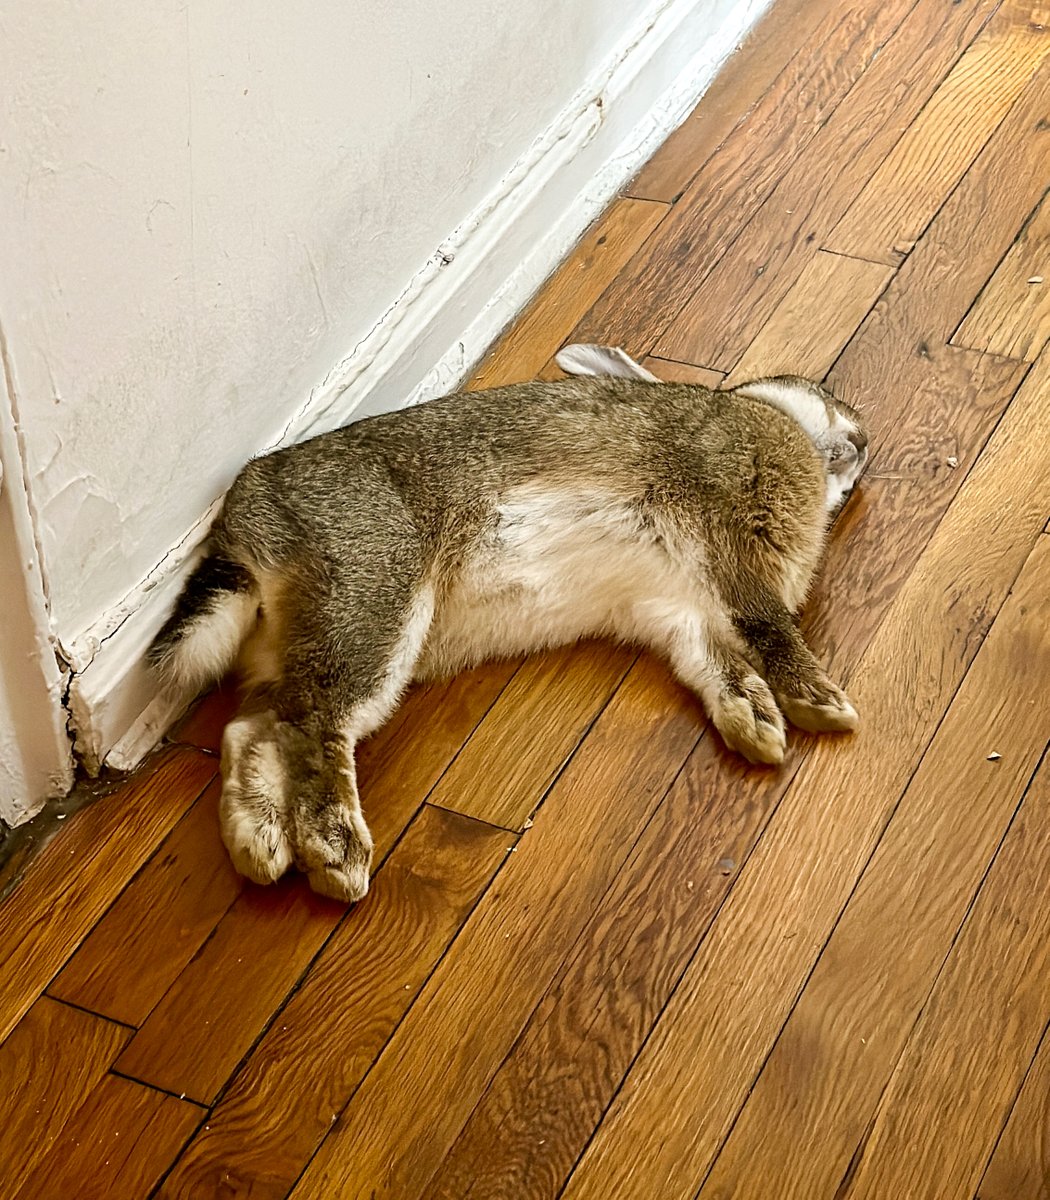 😴💘 Flompers Cashmere Bunny seen Sat 3/25 power-napping on Hallway Meadows after a hoppy morning. Her quarantine ends at 6pm! No signs of RHDV2, the virus that can jump btw wild E. Cottontails & domestics ditched in parks. Today is a good day. 🥳